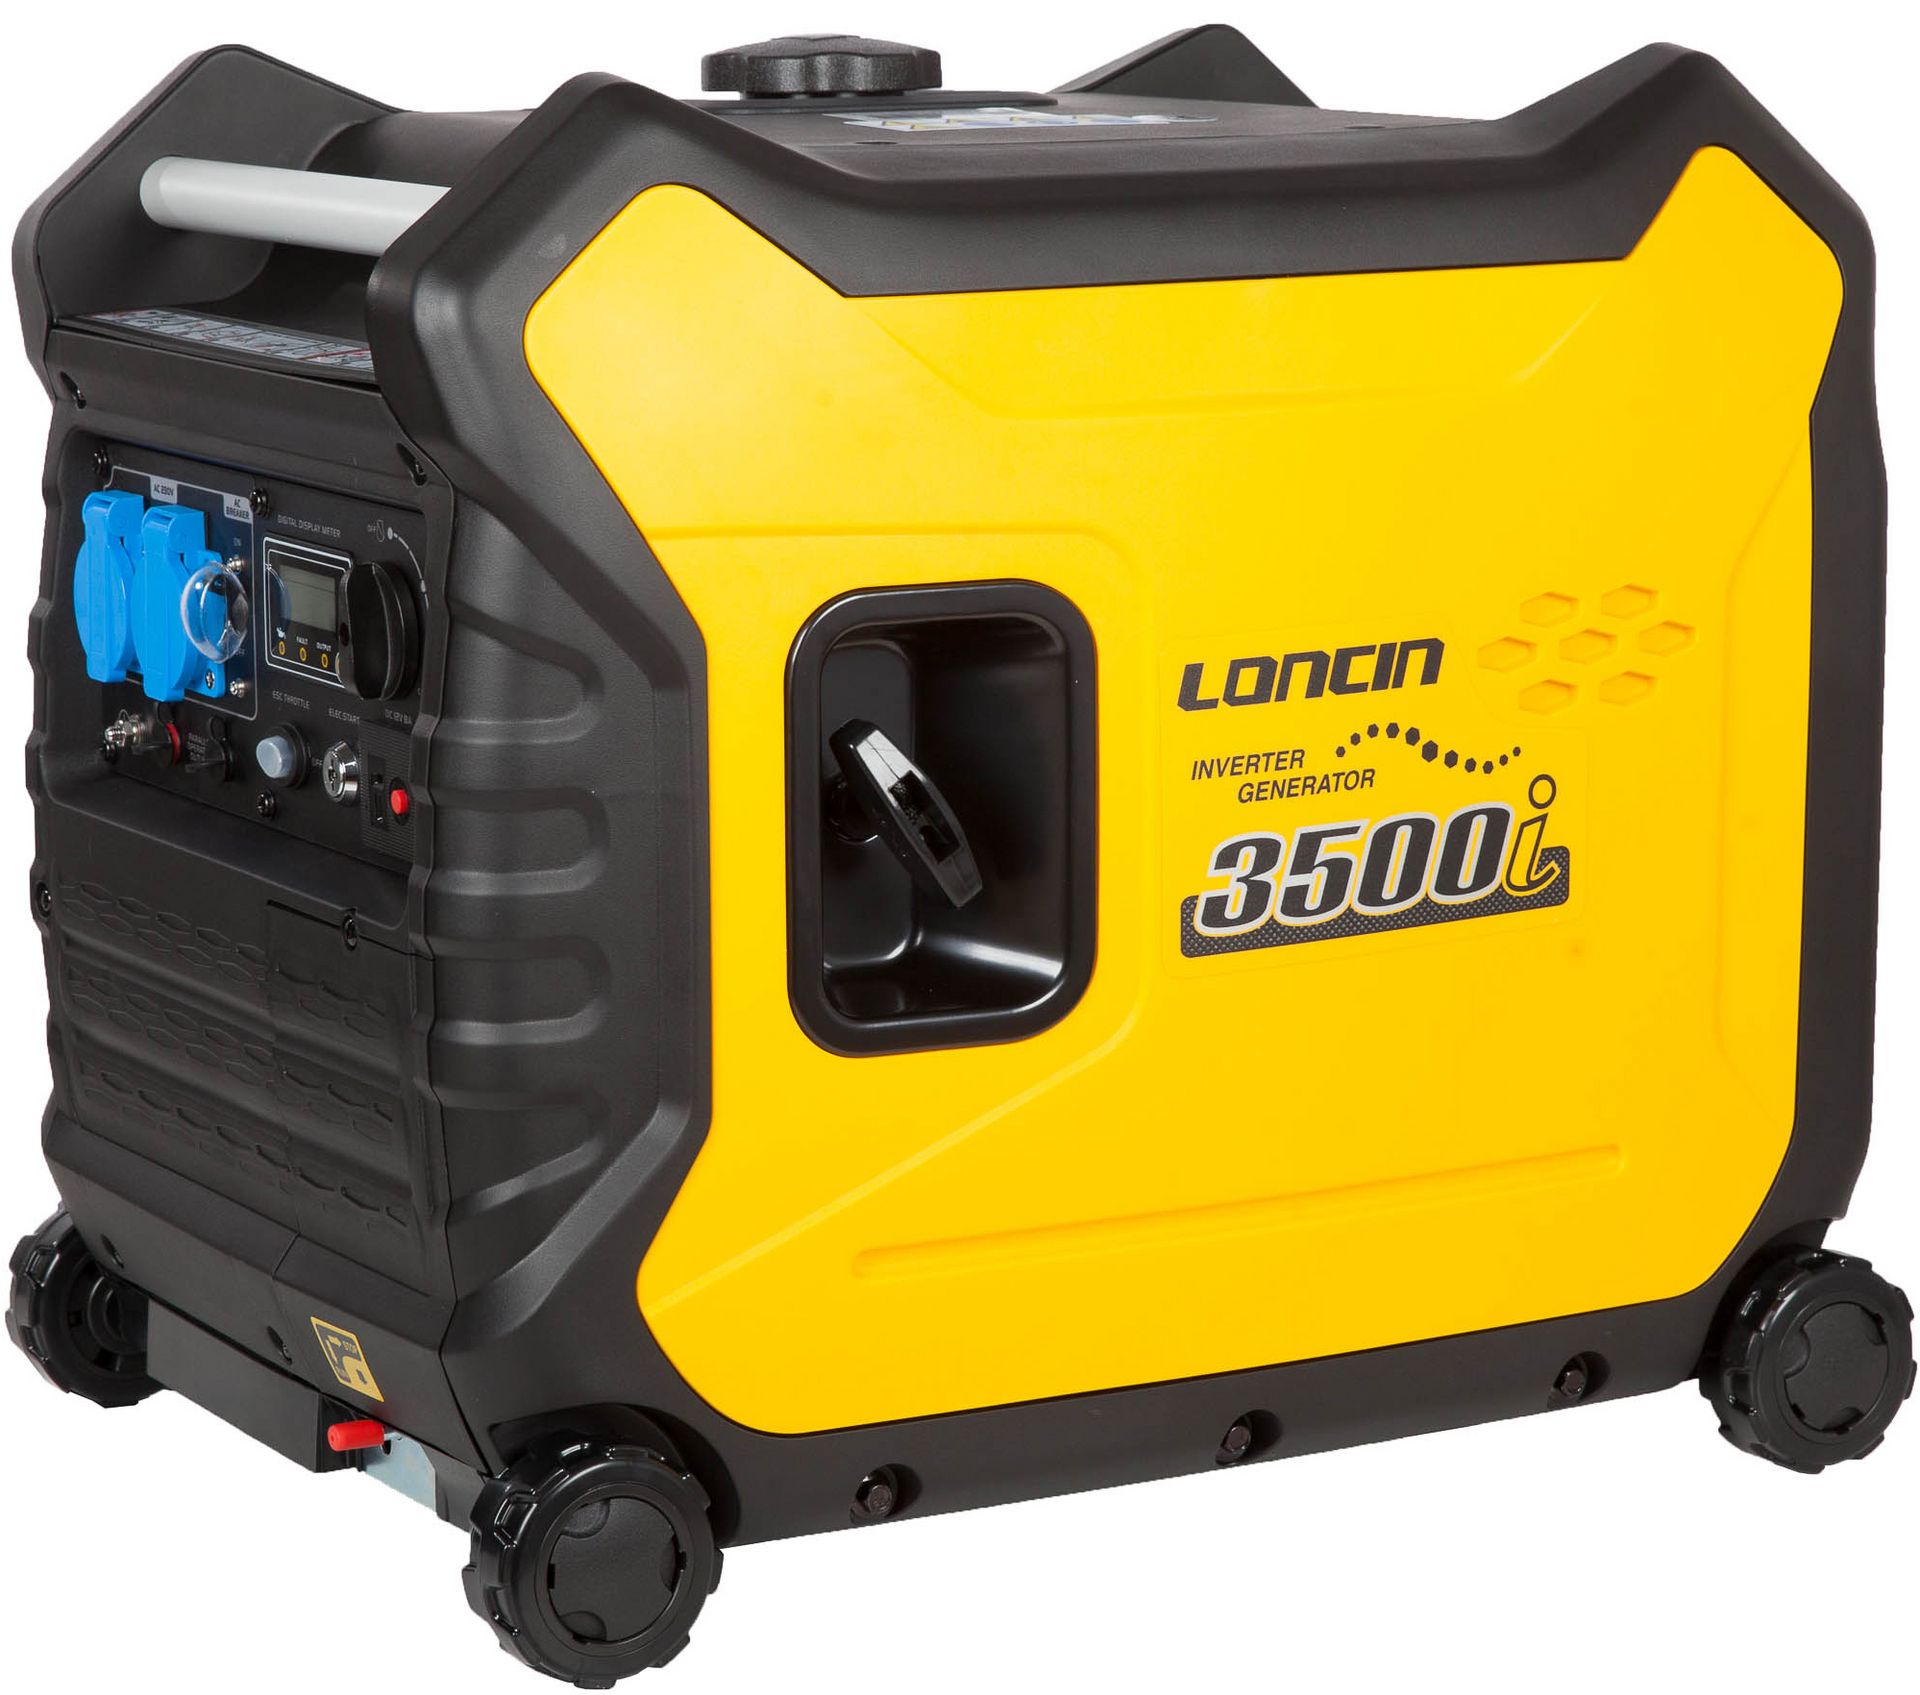 What kind of generator for home